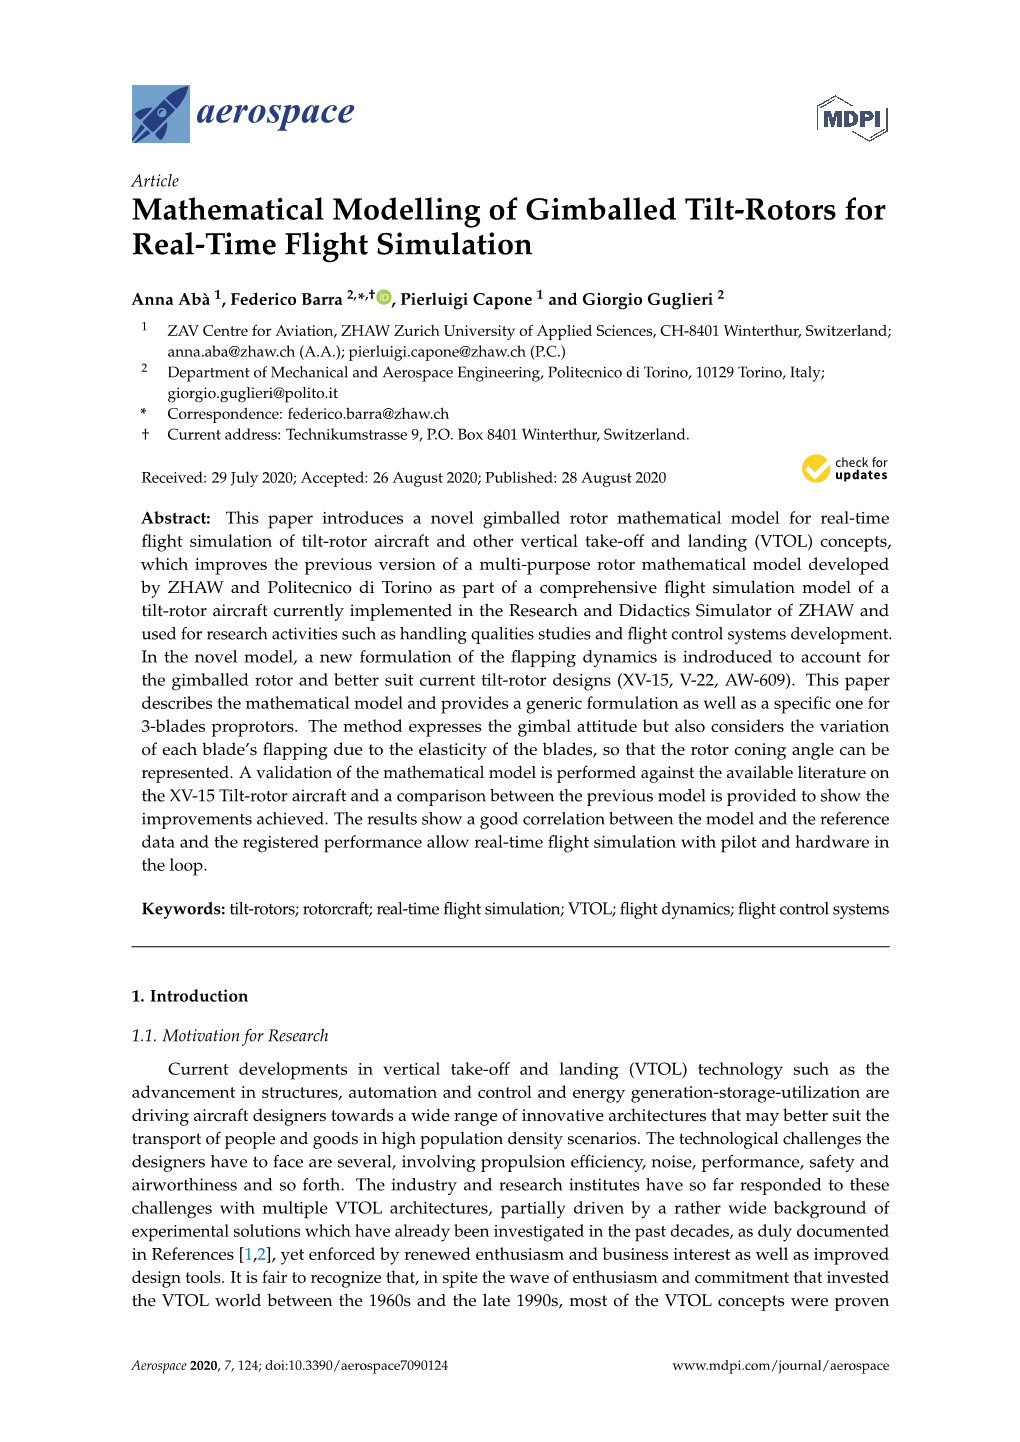 Mathematical Modelling of Gimballed Tilt-Rotors for Real-Time Flight Simulation